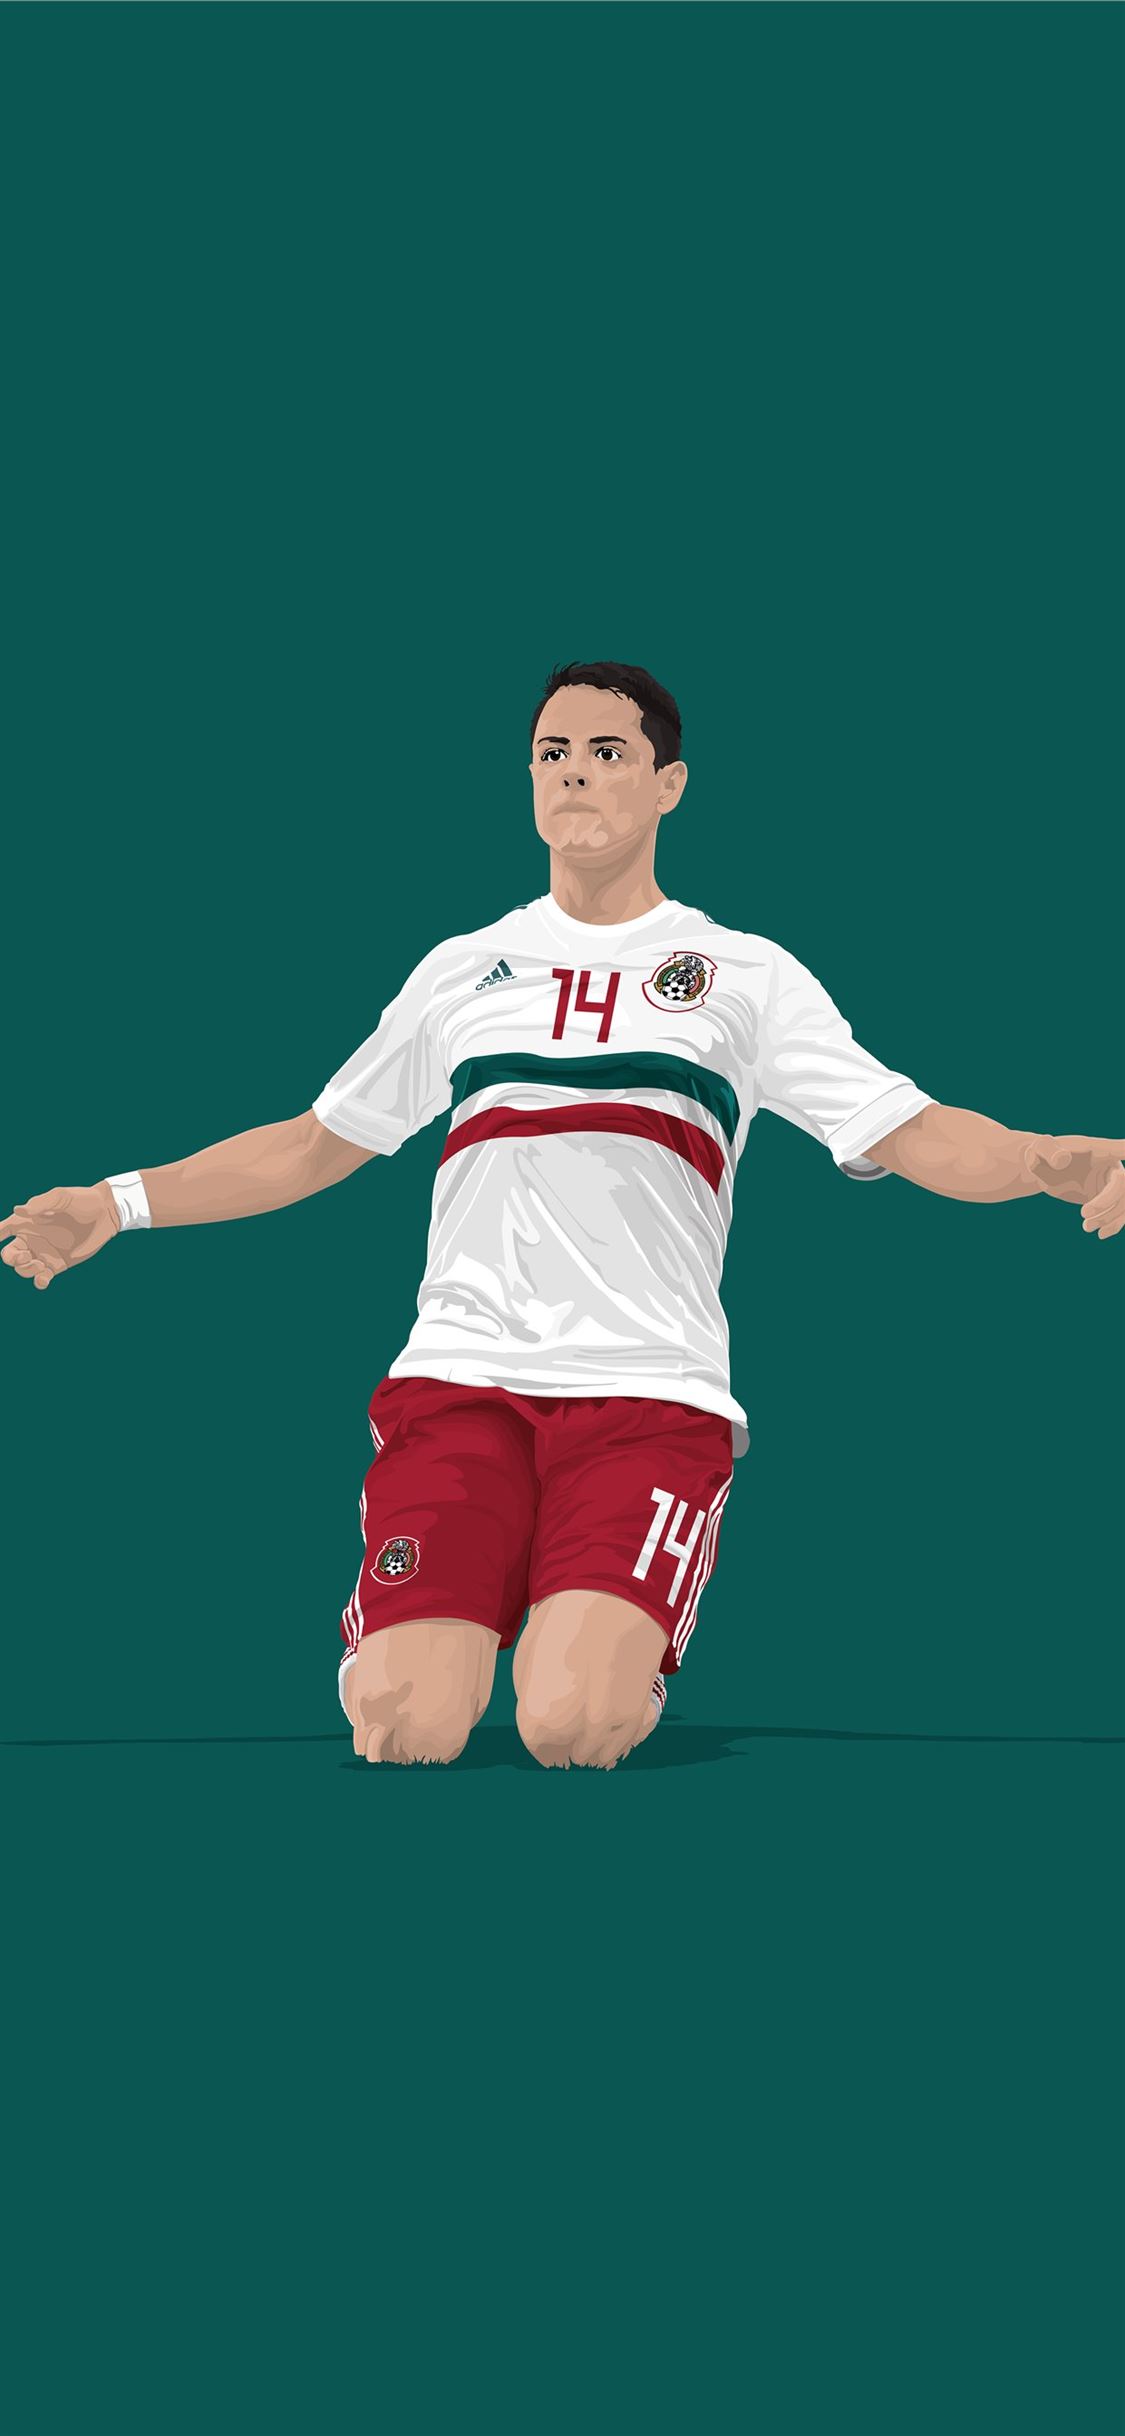 2014 Mexico Soccer Team Roster  Mexico Football Team World Cup 2014  HD  Background  Mexico national team Team wallpaper Mexico football team